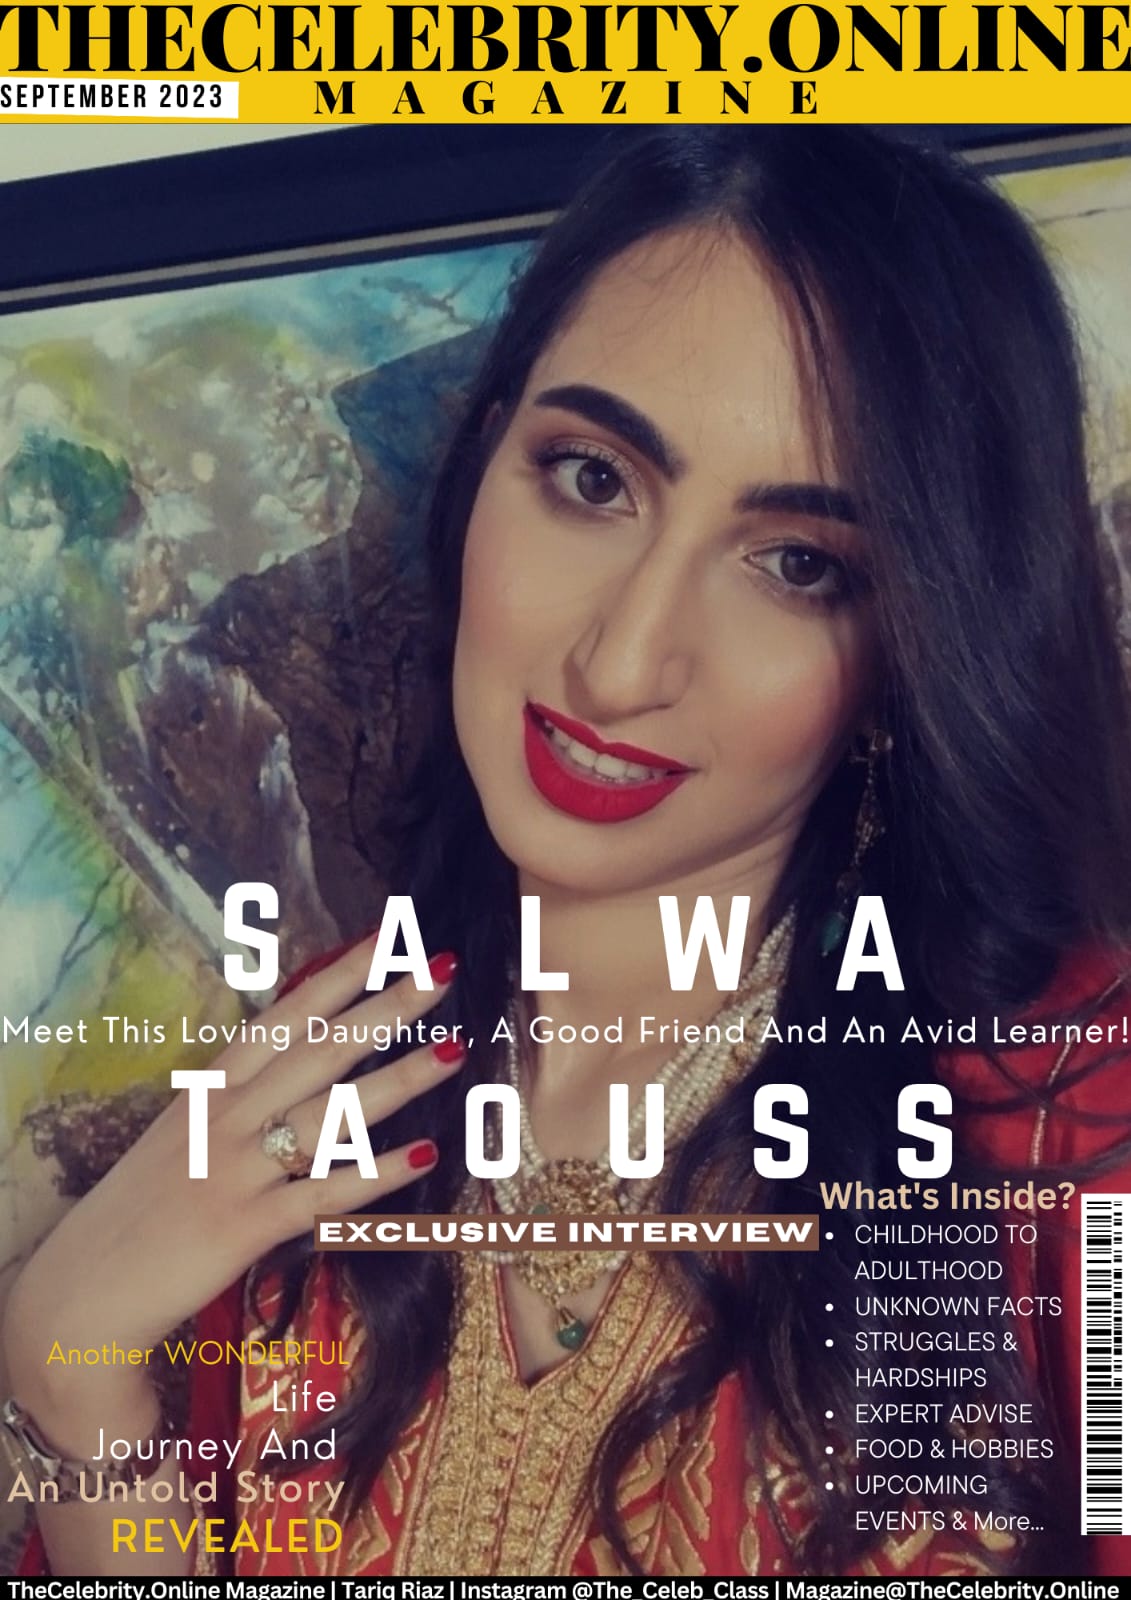 Salwa Taouss Exclusive Interview – ‘Surround Yourself With People Who Lift You Up’